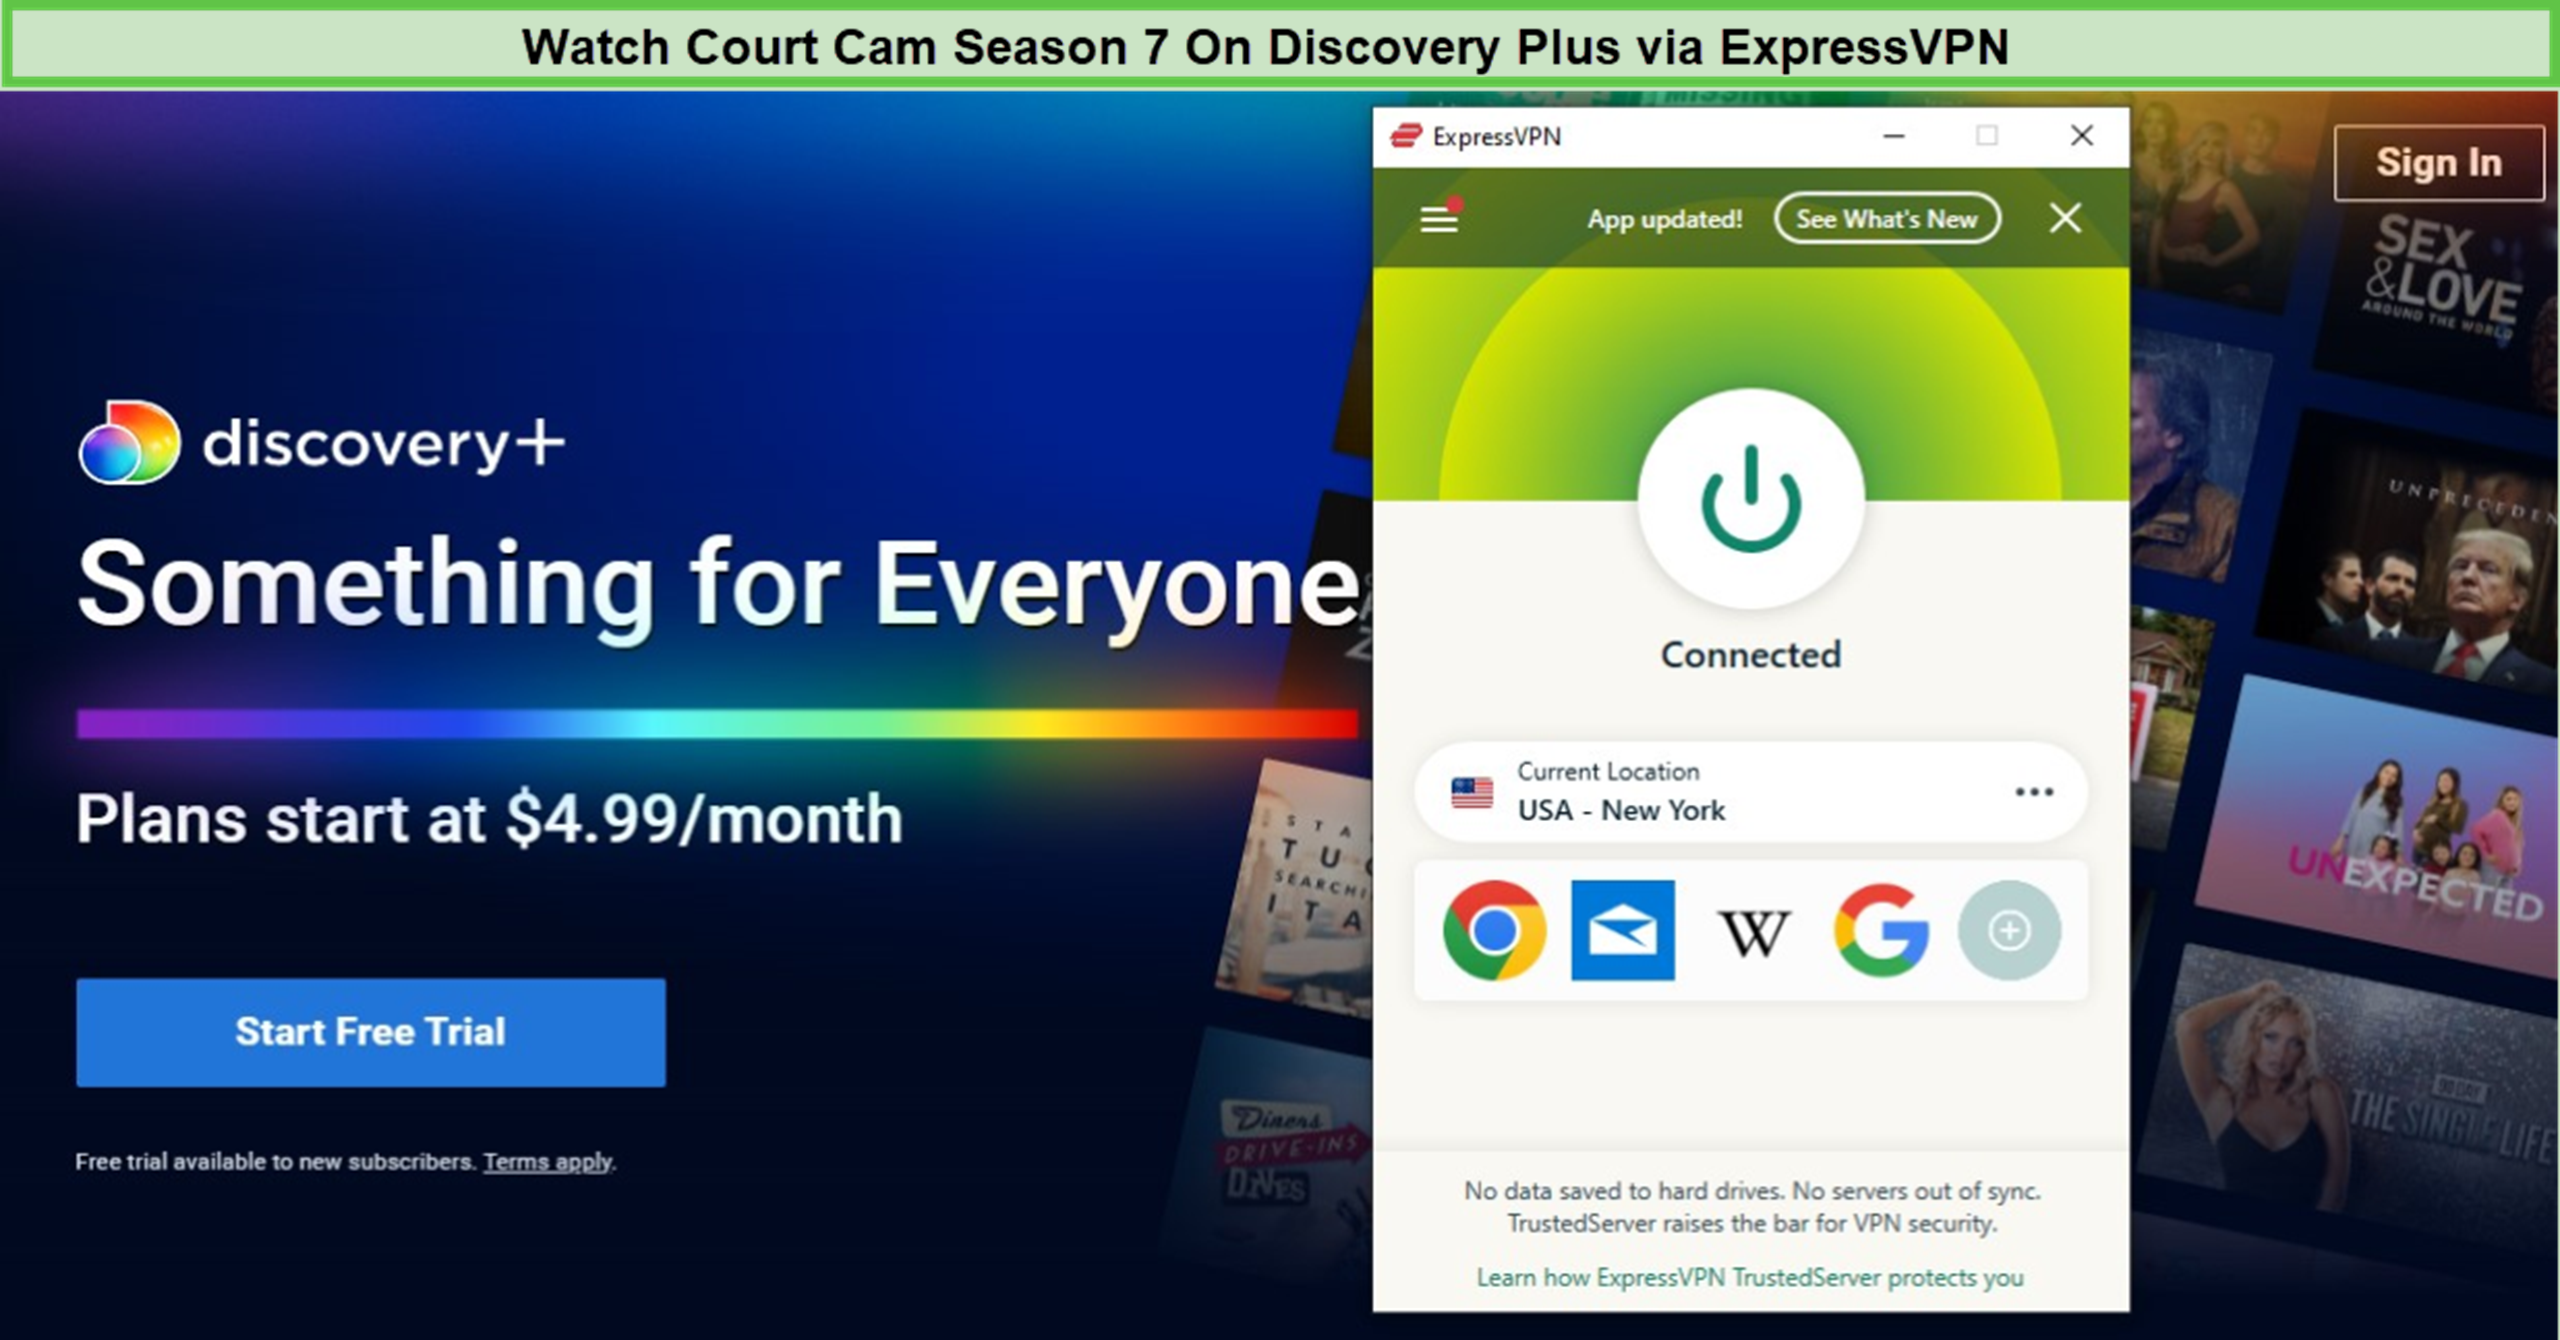 Watch-Court-Cam-Season-7-in-Japan-on-Discovery-Plus-With-ExpressVPN